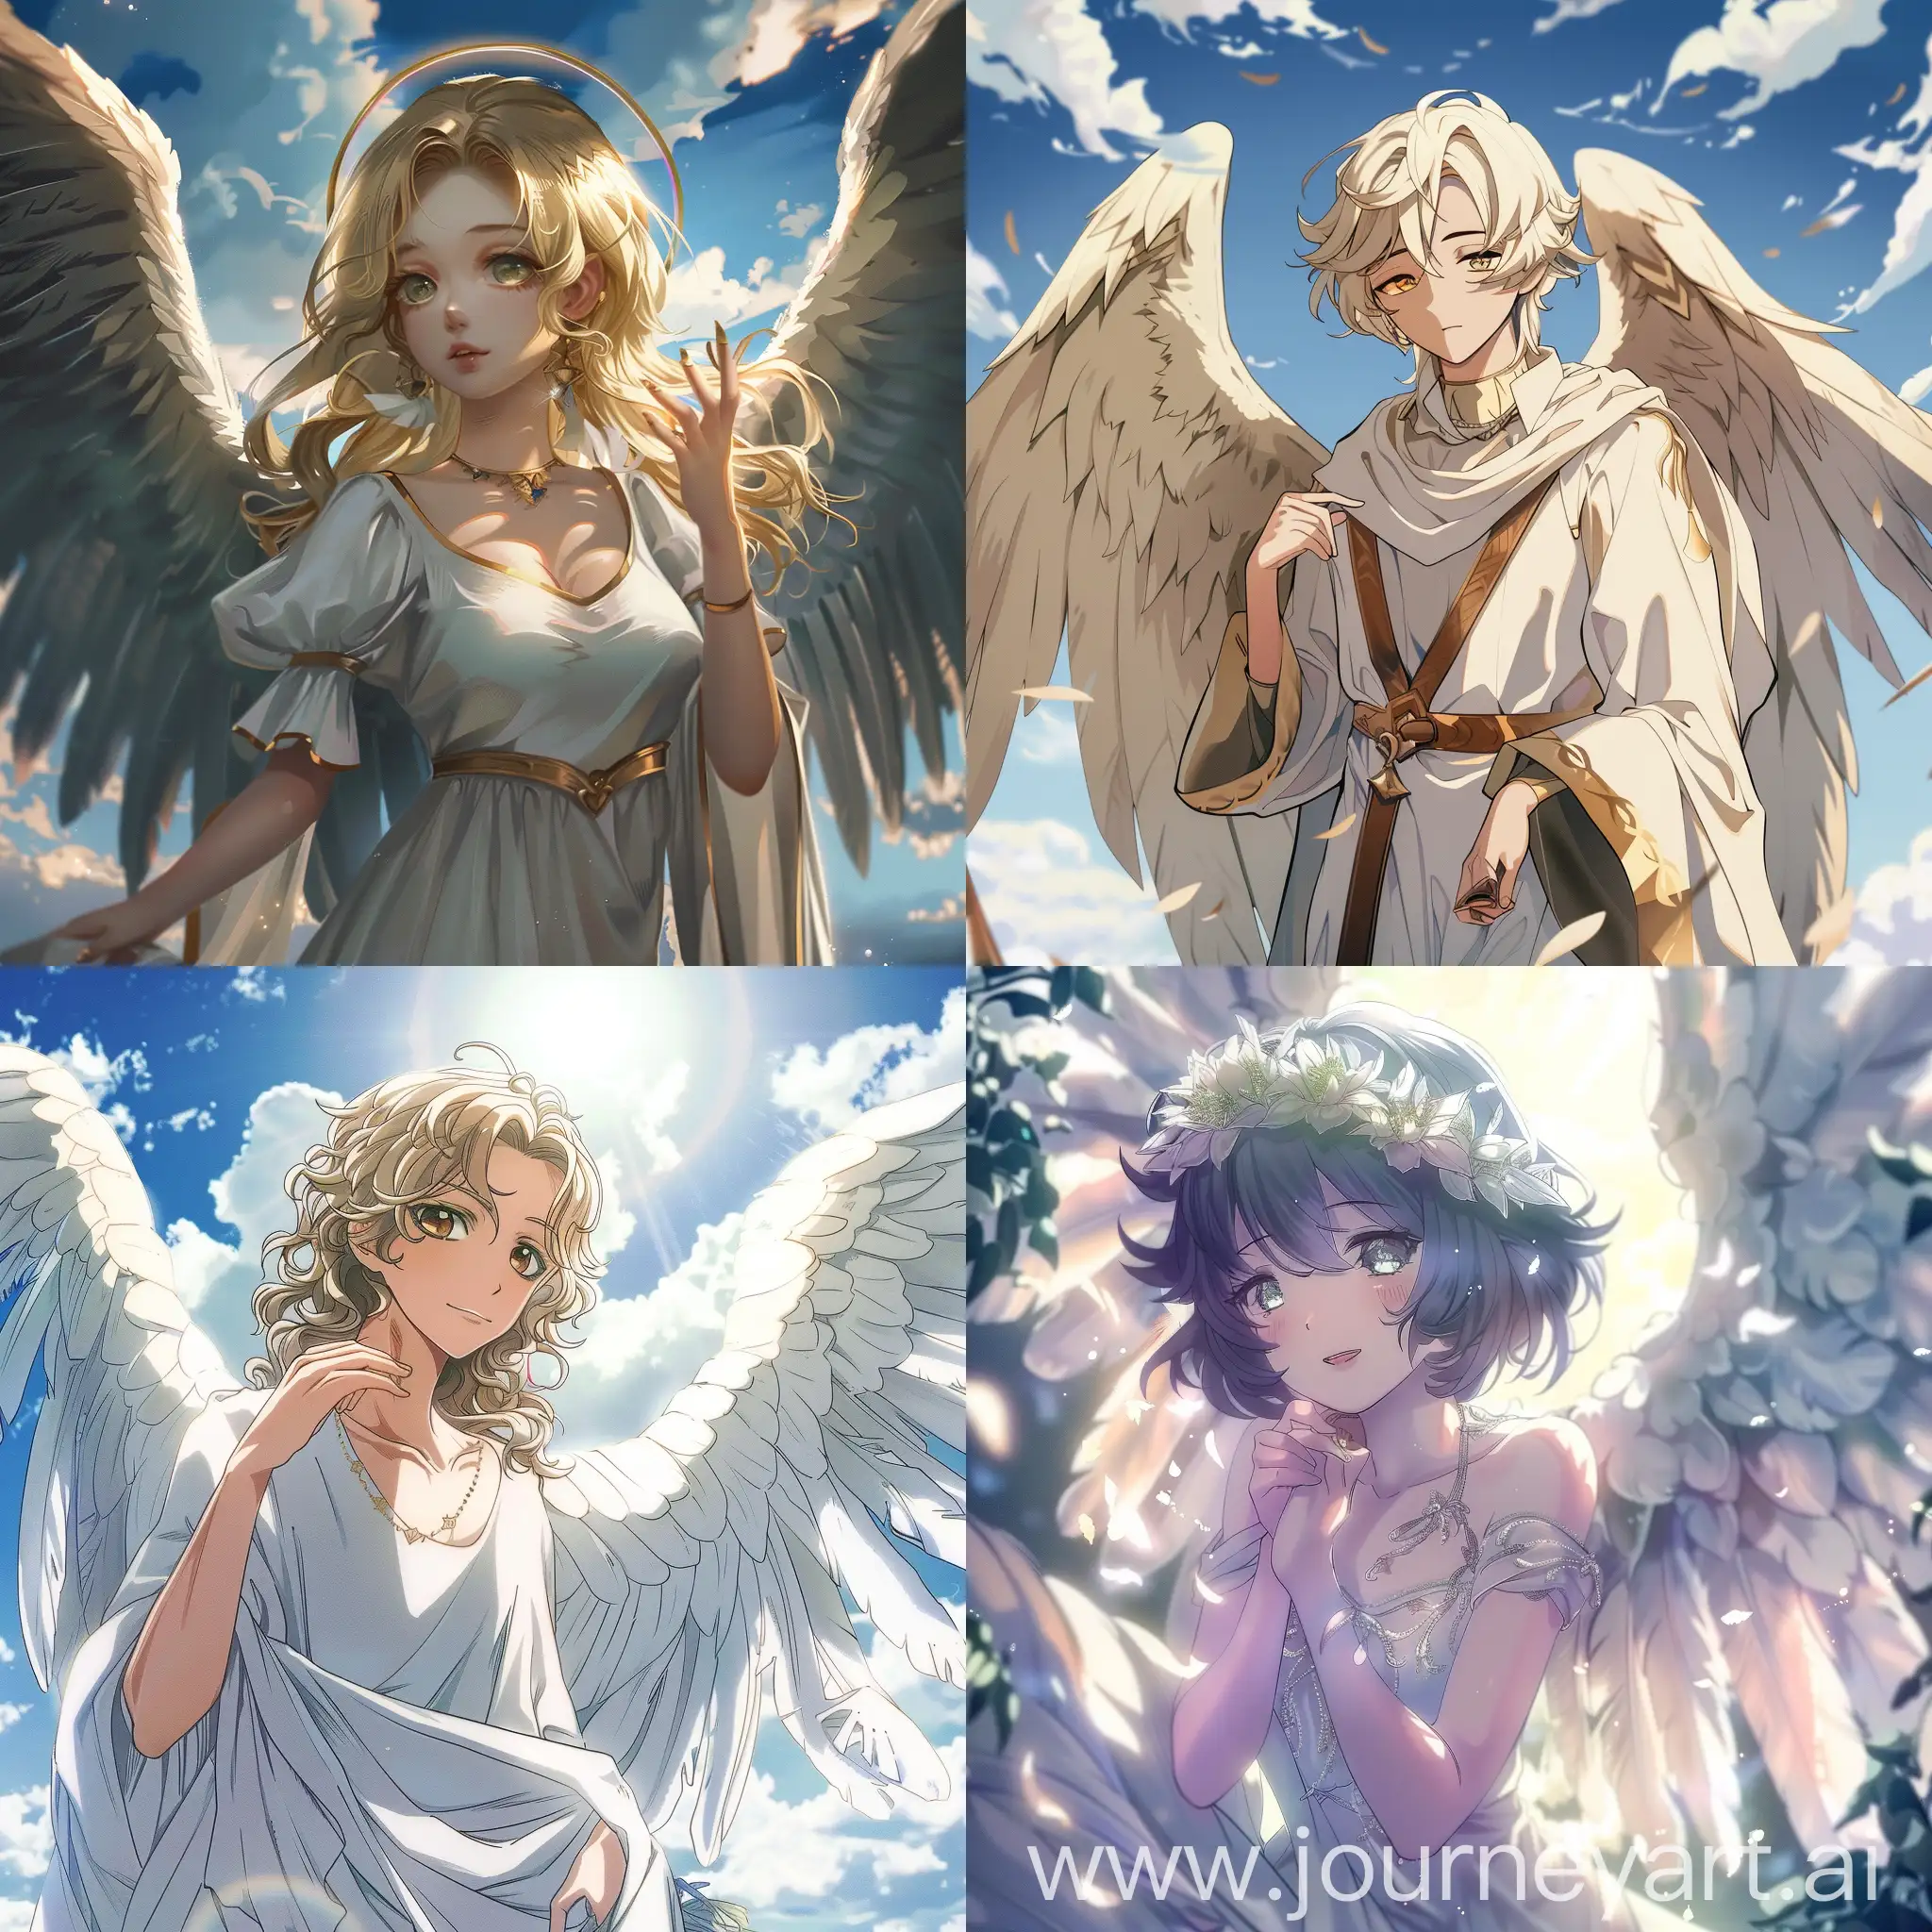 Biblically accurate angel in anime style